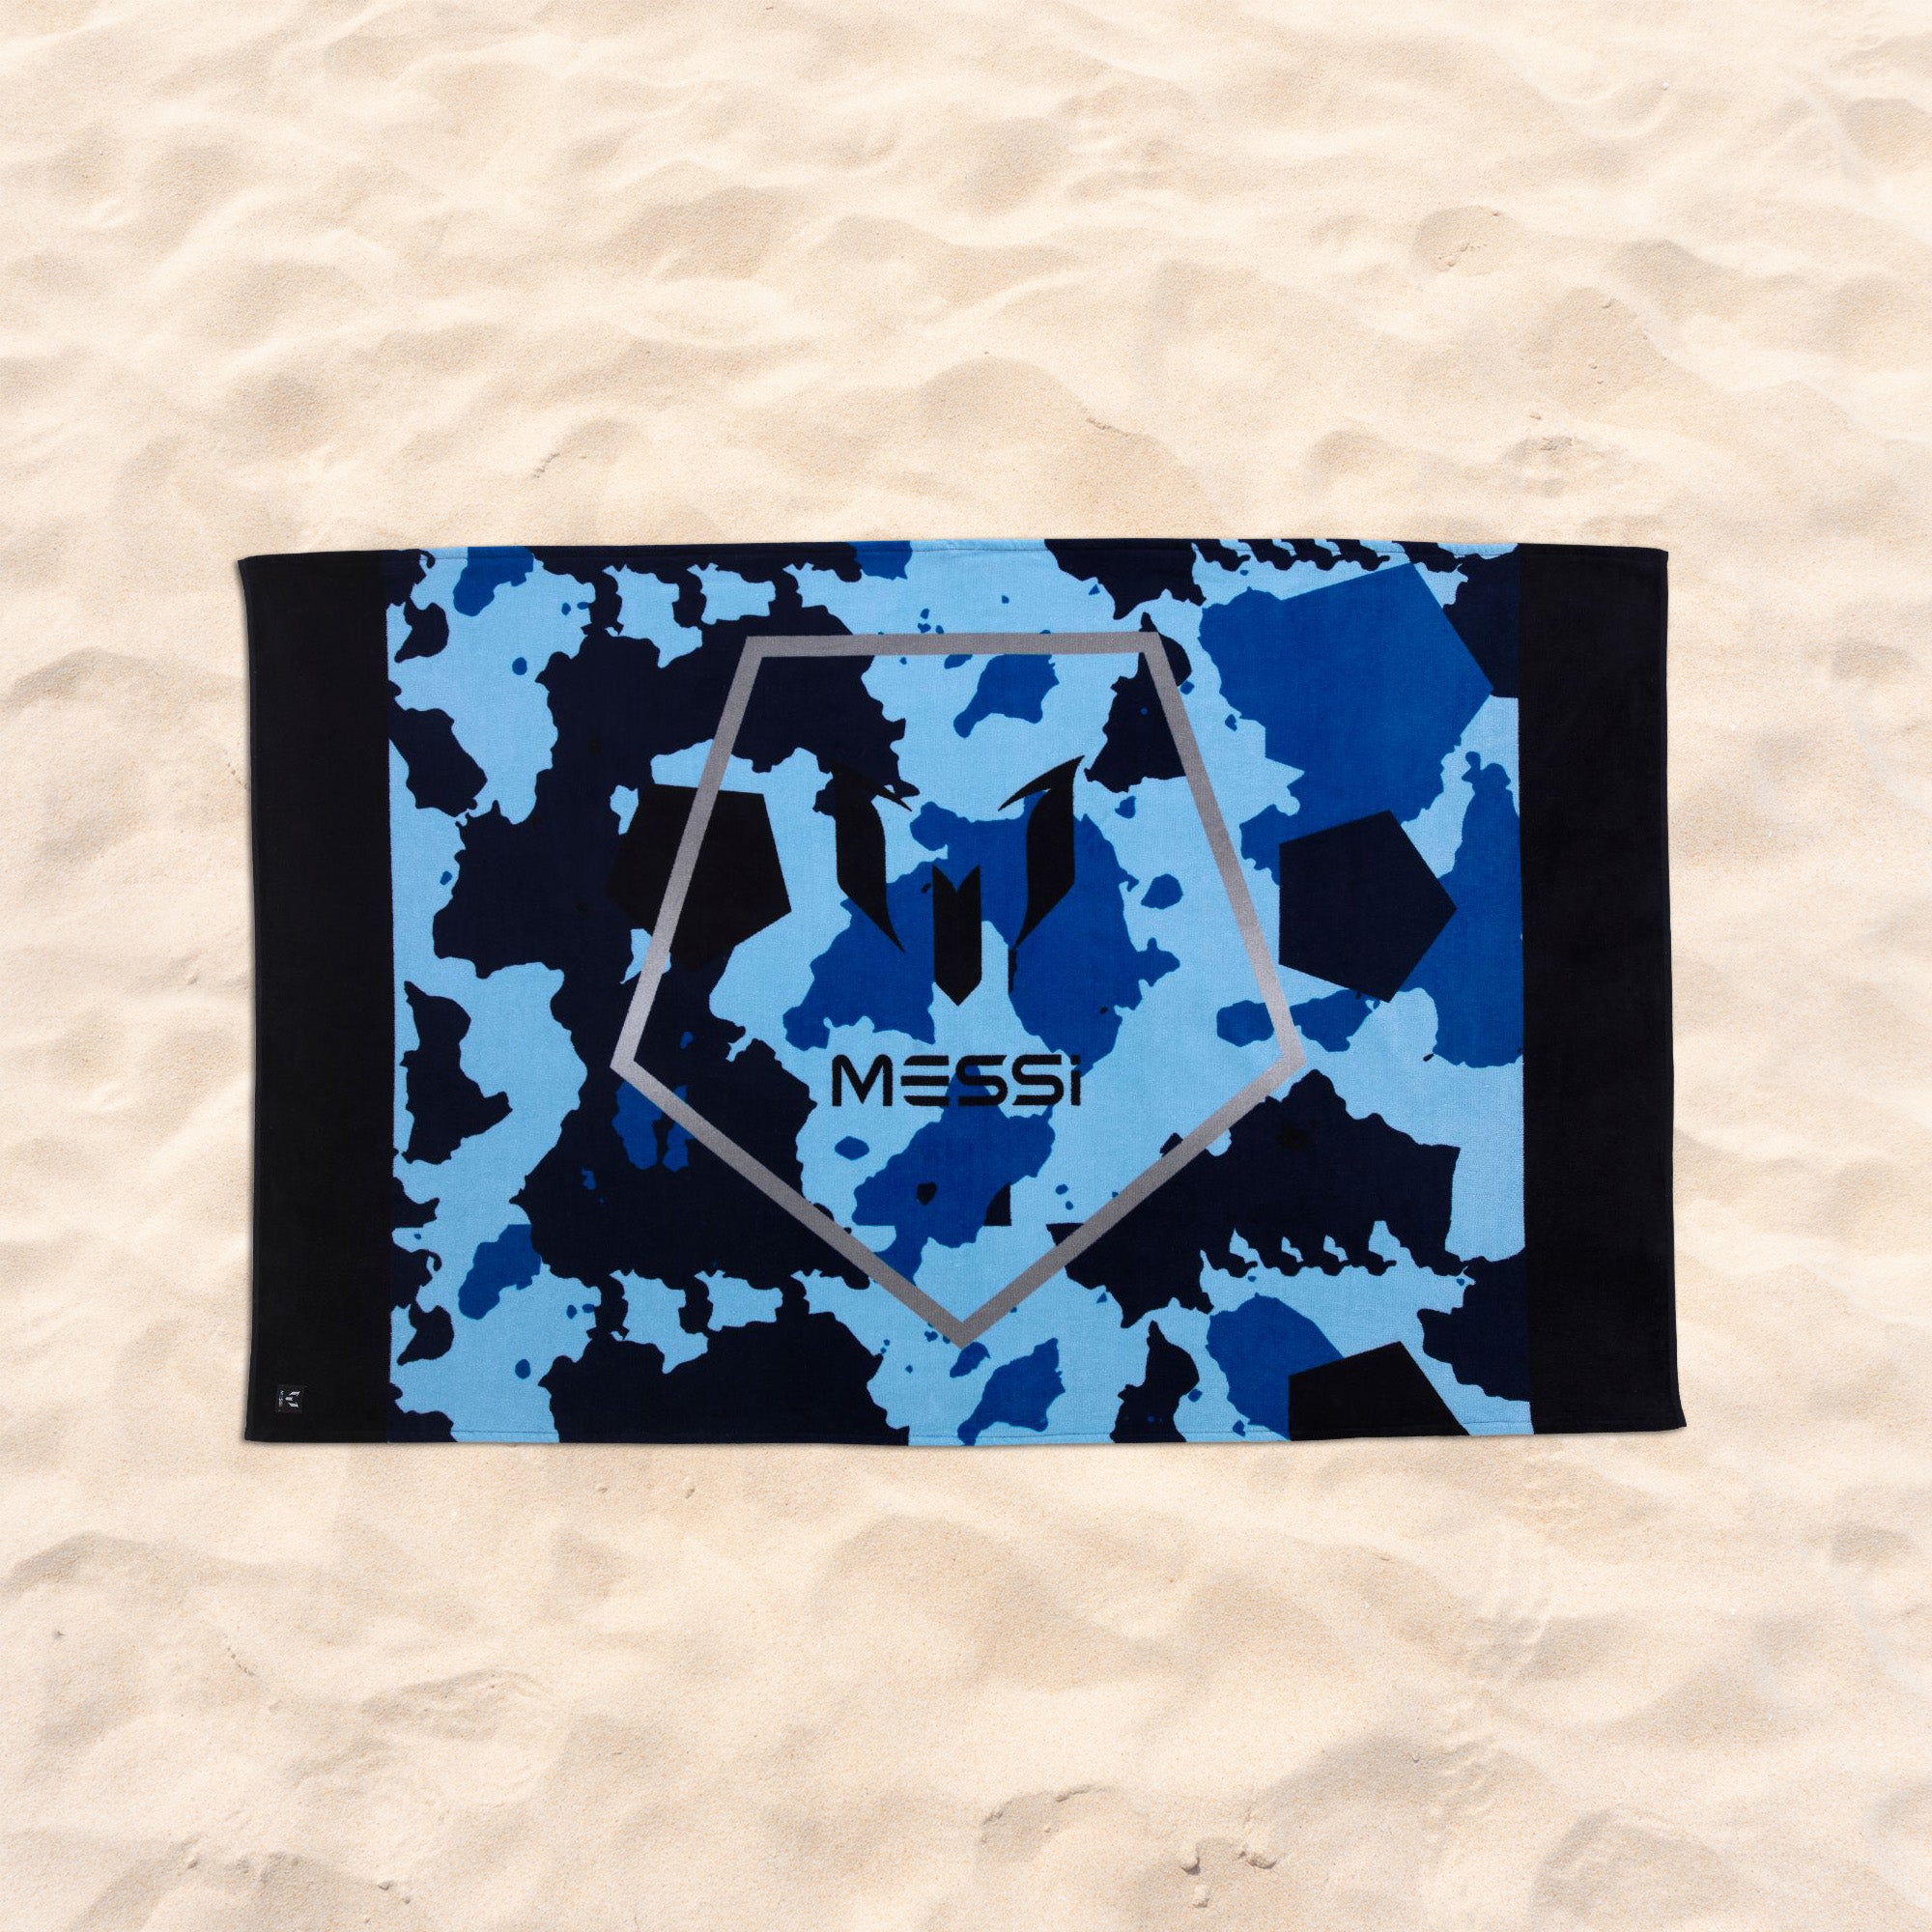 Shop Kid's Beach Towels at The Messi Store